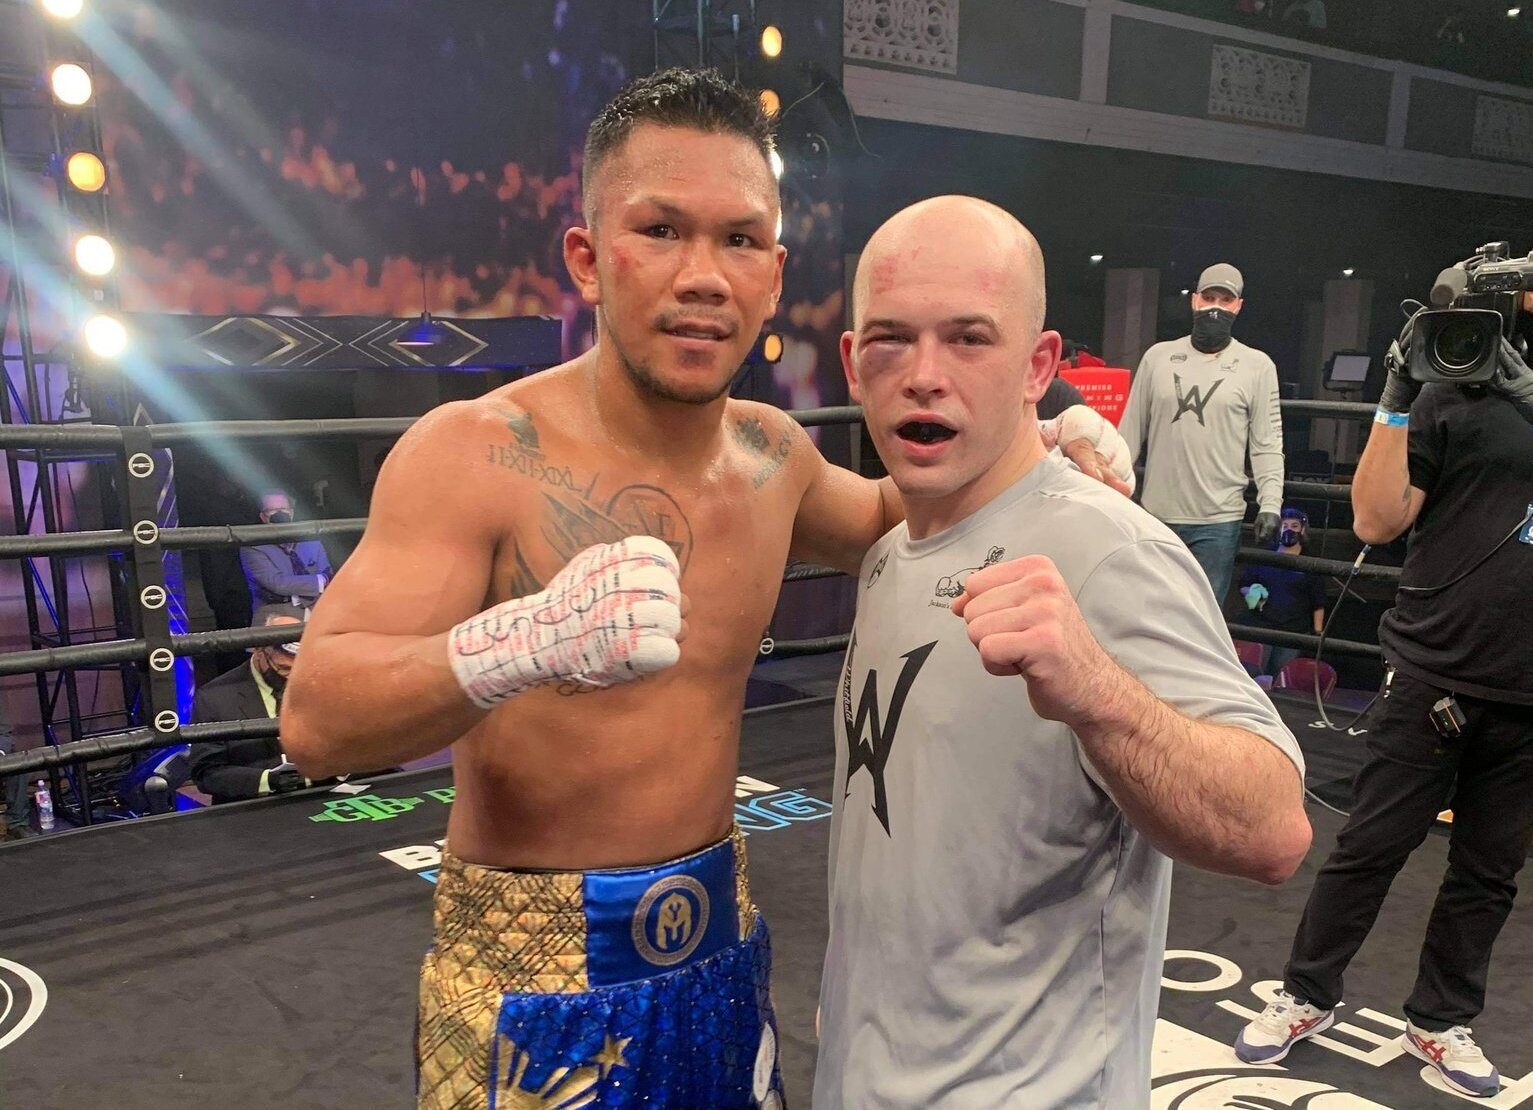 Eumir Marcial wins first pro fight in lopsided style